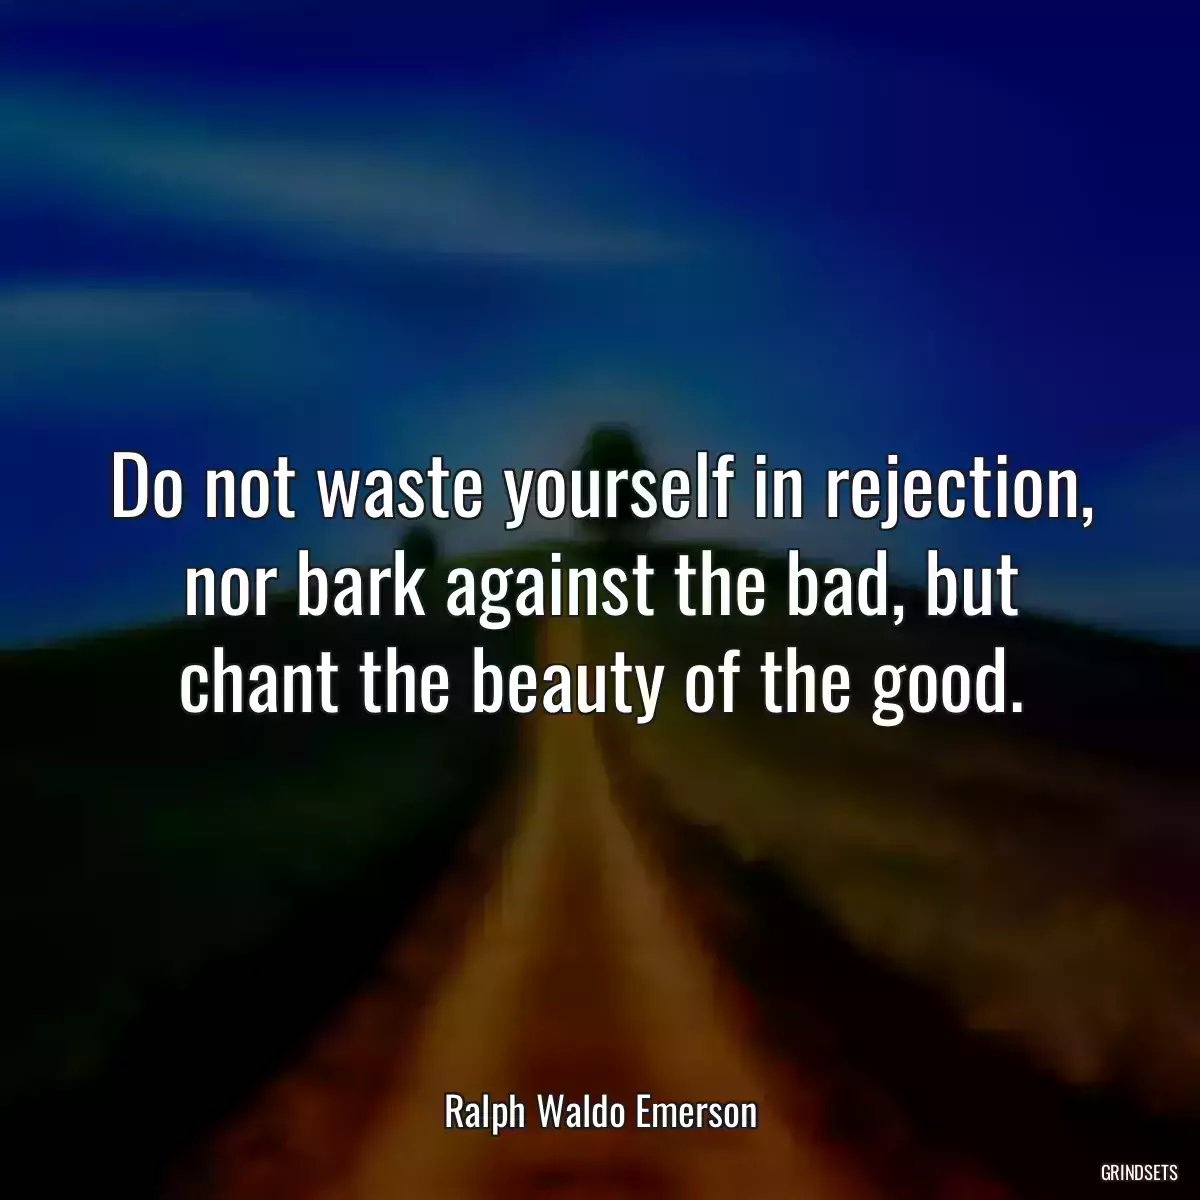 Do not waste yourself in rejection, nor bark against the bad, but chant the beauty of the good.